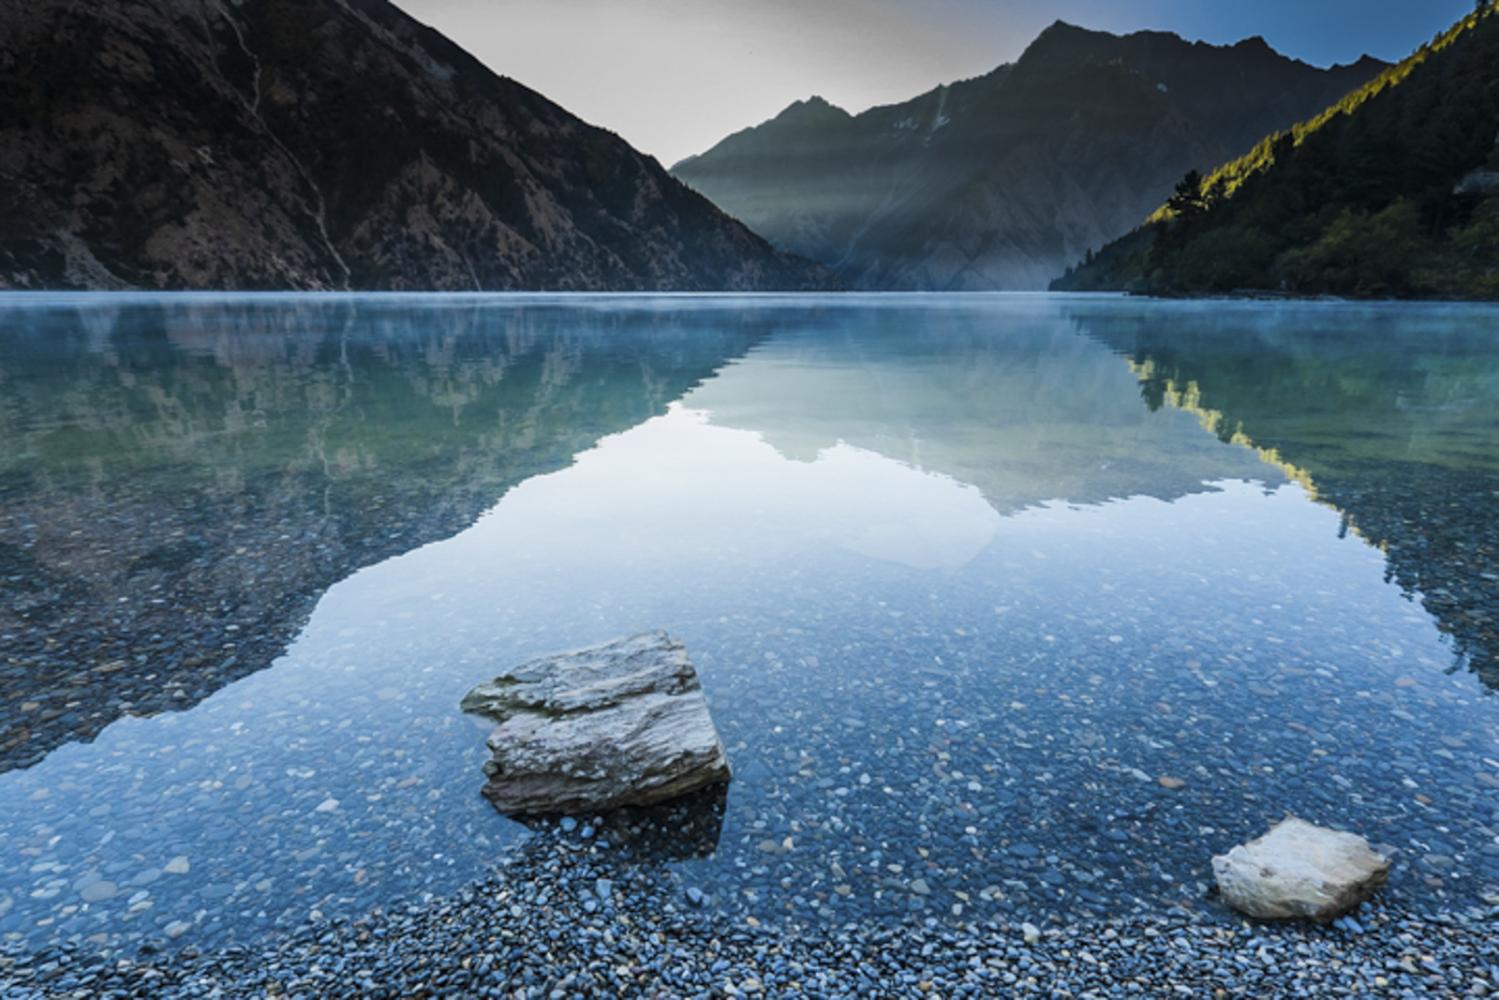 Image from ENVIRONMENT - Lake Phoksundo located at an elevation of 11,849ft inside...